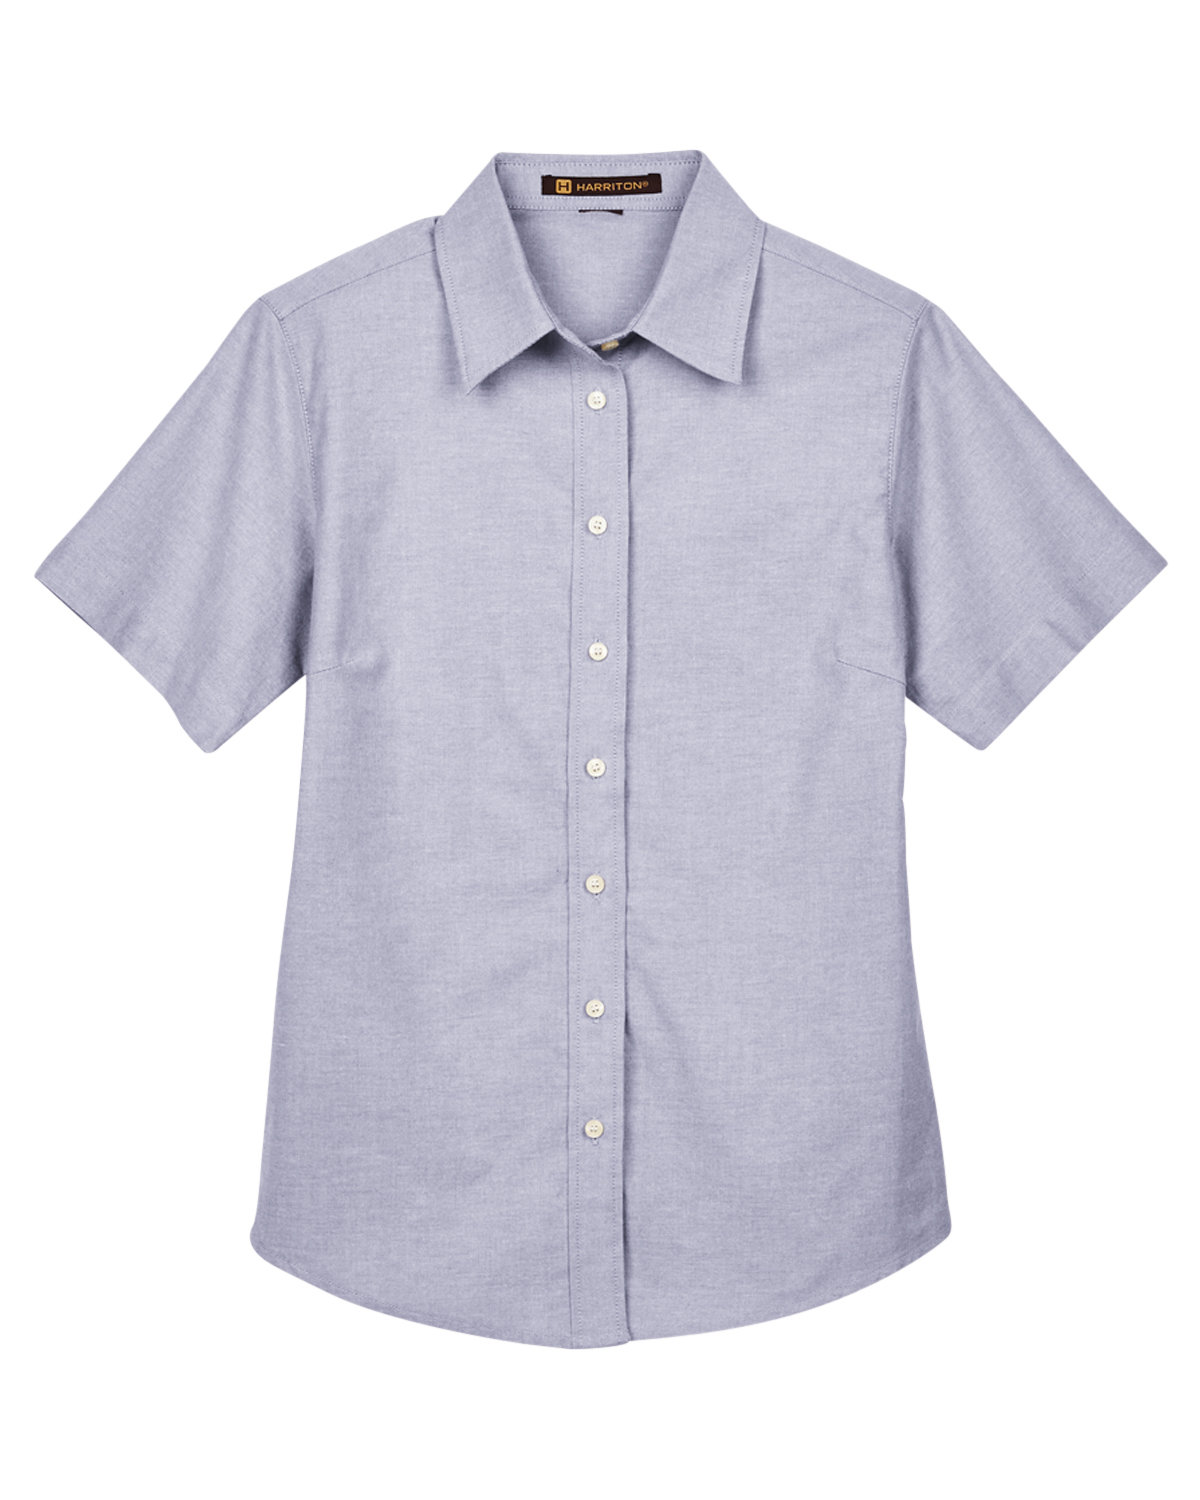 Harriton Ladies' Short-Sleeve Oxford with Stain-Release | alphabroder